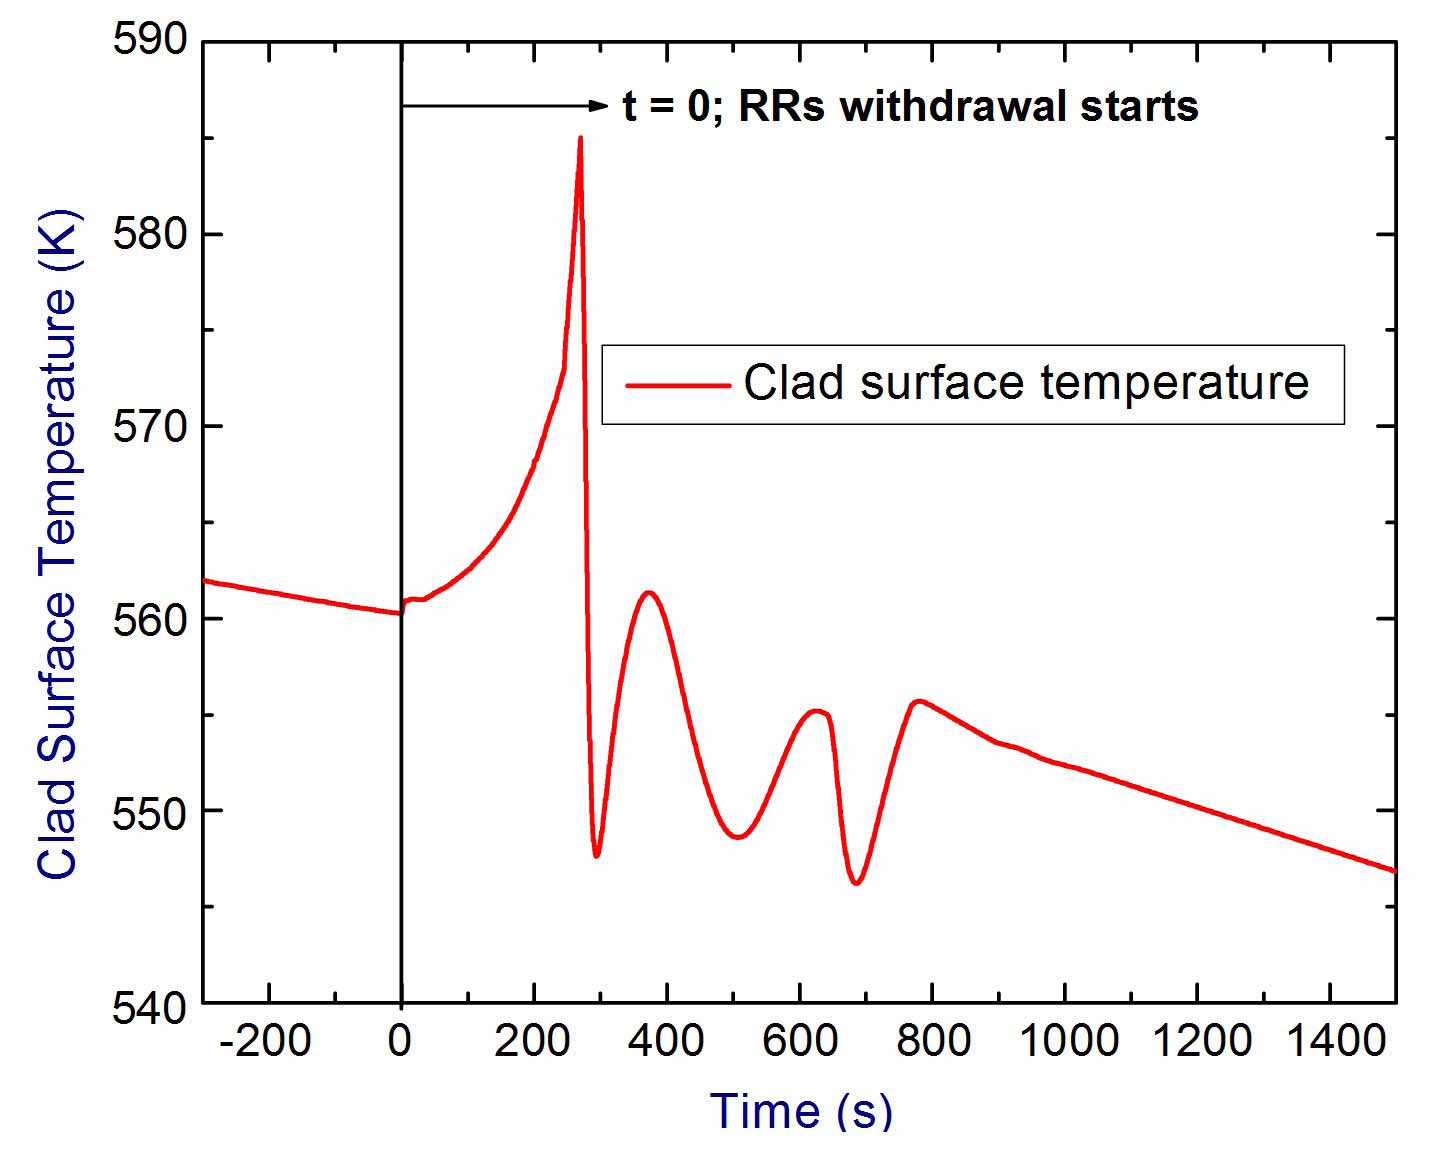 Clad Surface Temperature Following Rod Withdrawal Transient for Chernobyl-like Accident